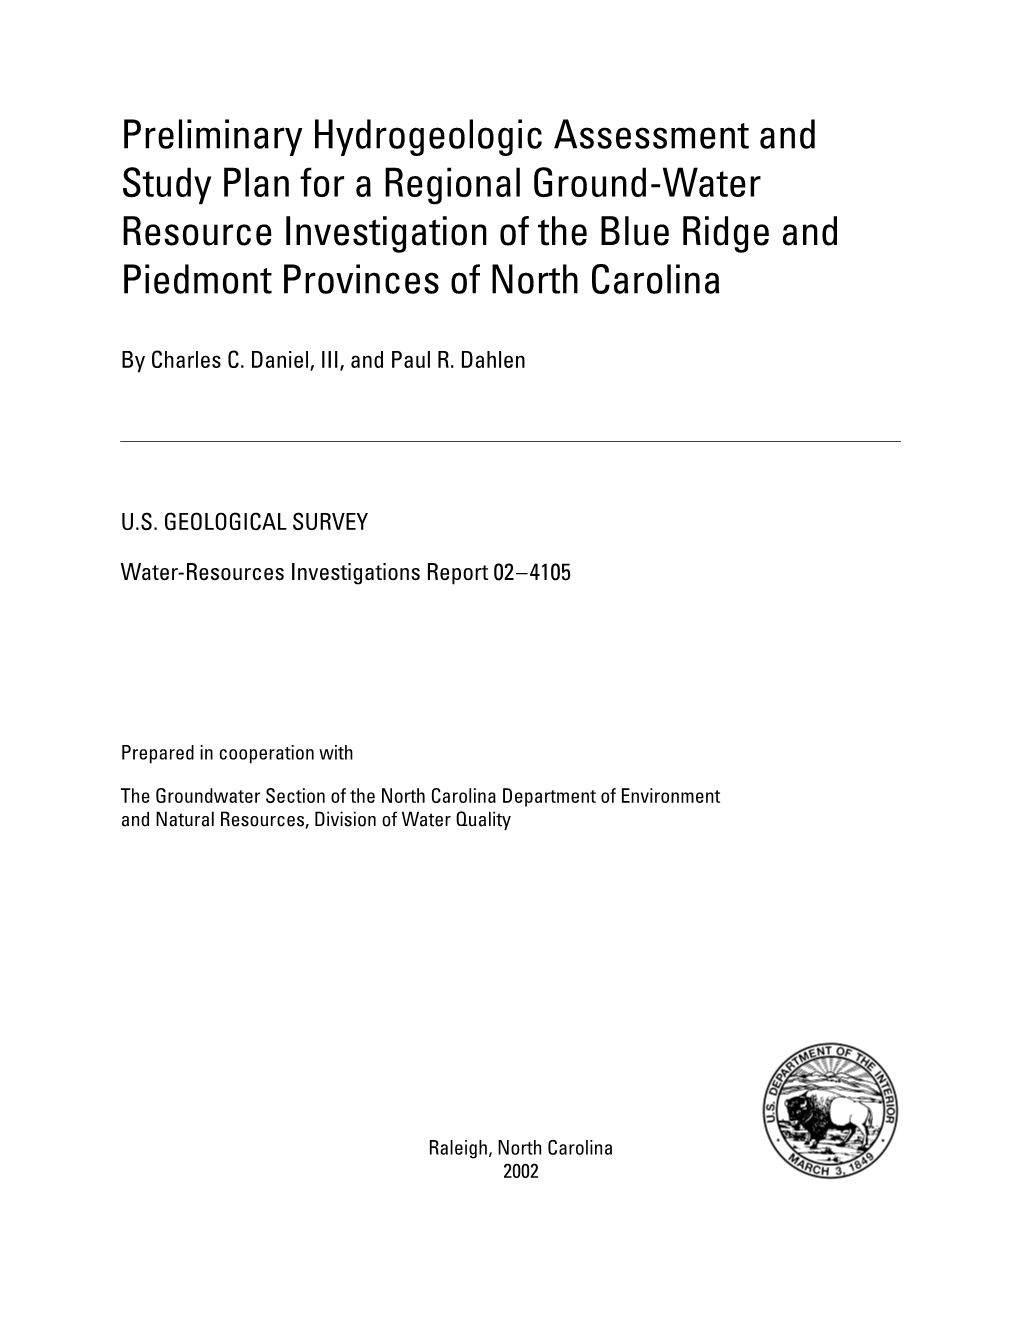 Preliminary Hydrogeologic Assessment and Study Plan for a Regional Ground-Water Resource Investigation of the Blue Ridge and Piedmont Provinces of North Carolina